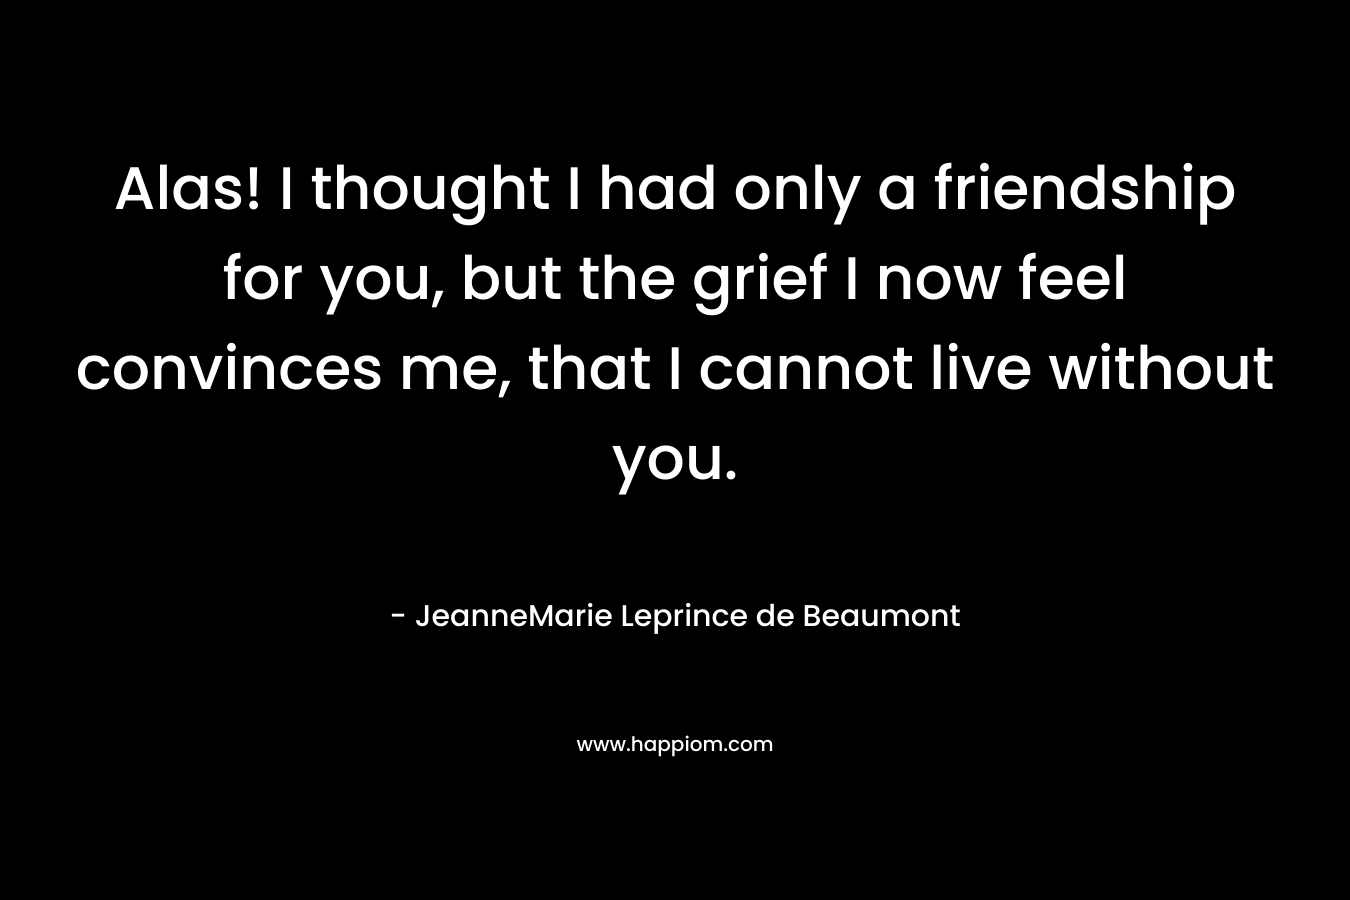 Alas! I thought I had only a friendship for you, but the grief I now feel convinces me, that I cannot live without you. – JeanneMarie Leprince de Beaumont